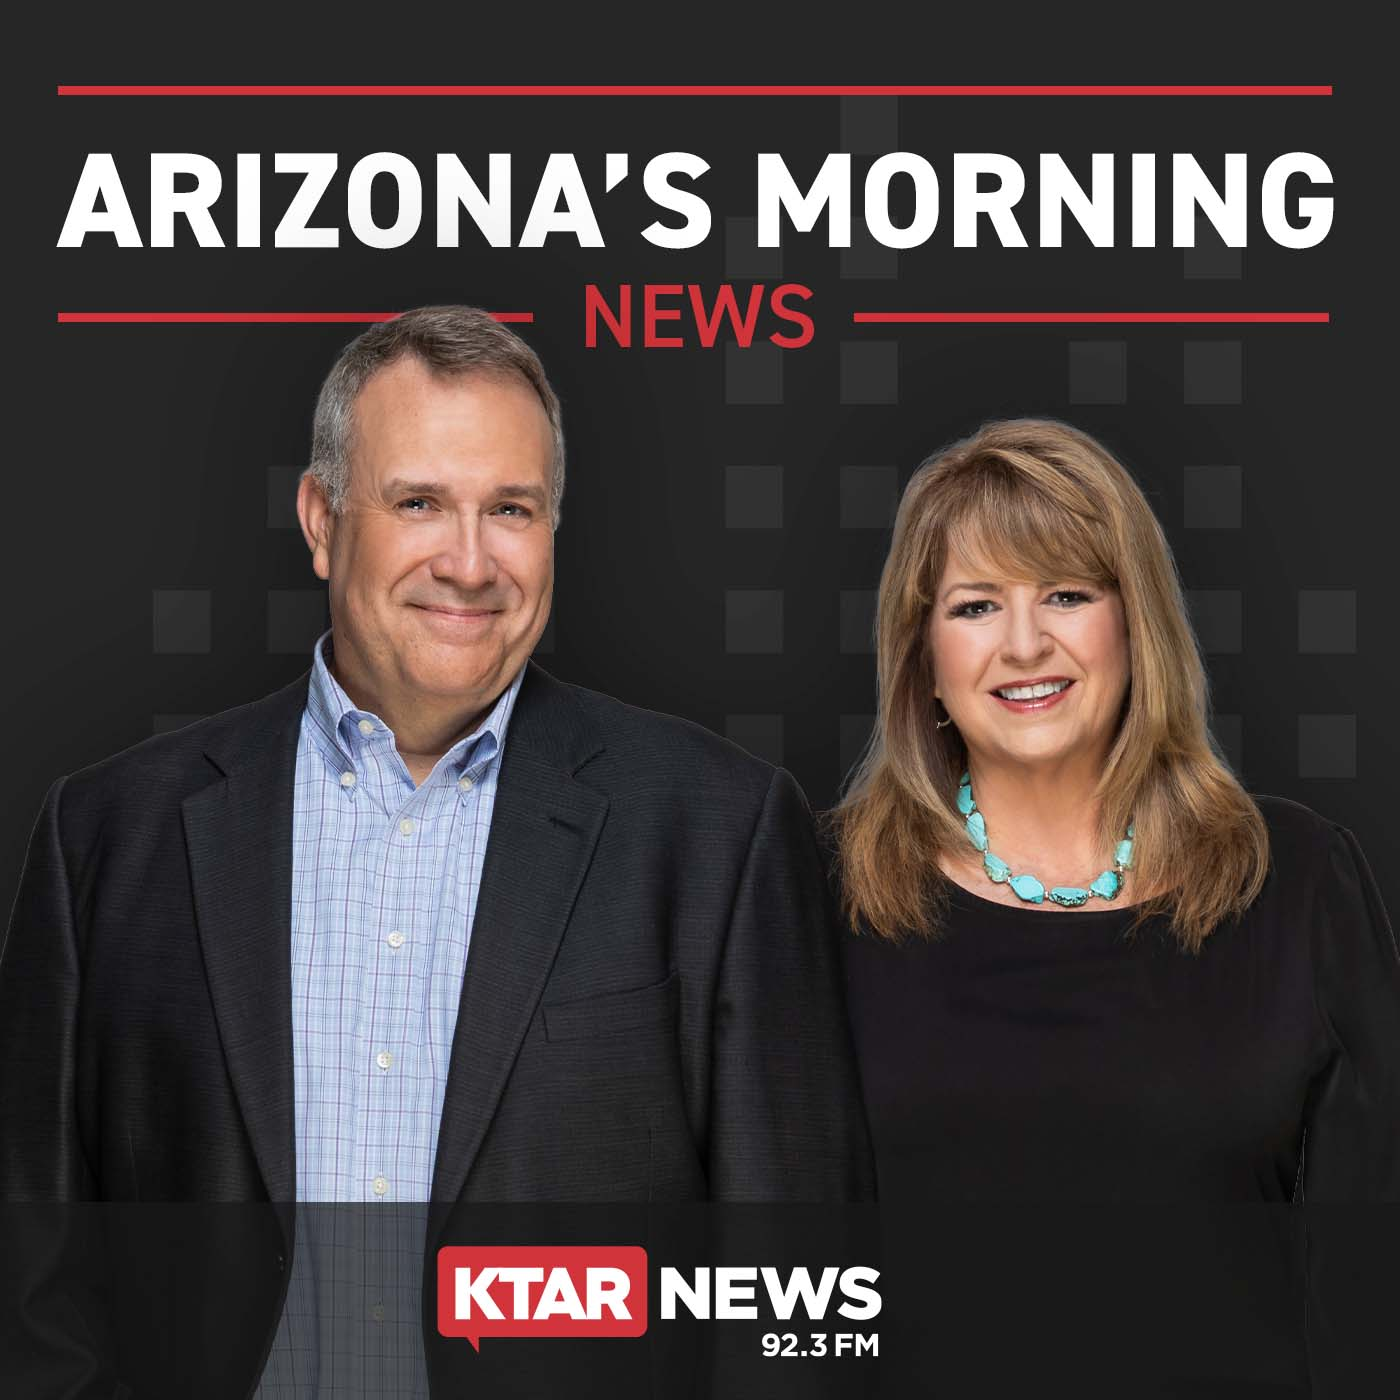 Sharper Point Commentary - Could more Californians come to Arizona?